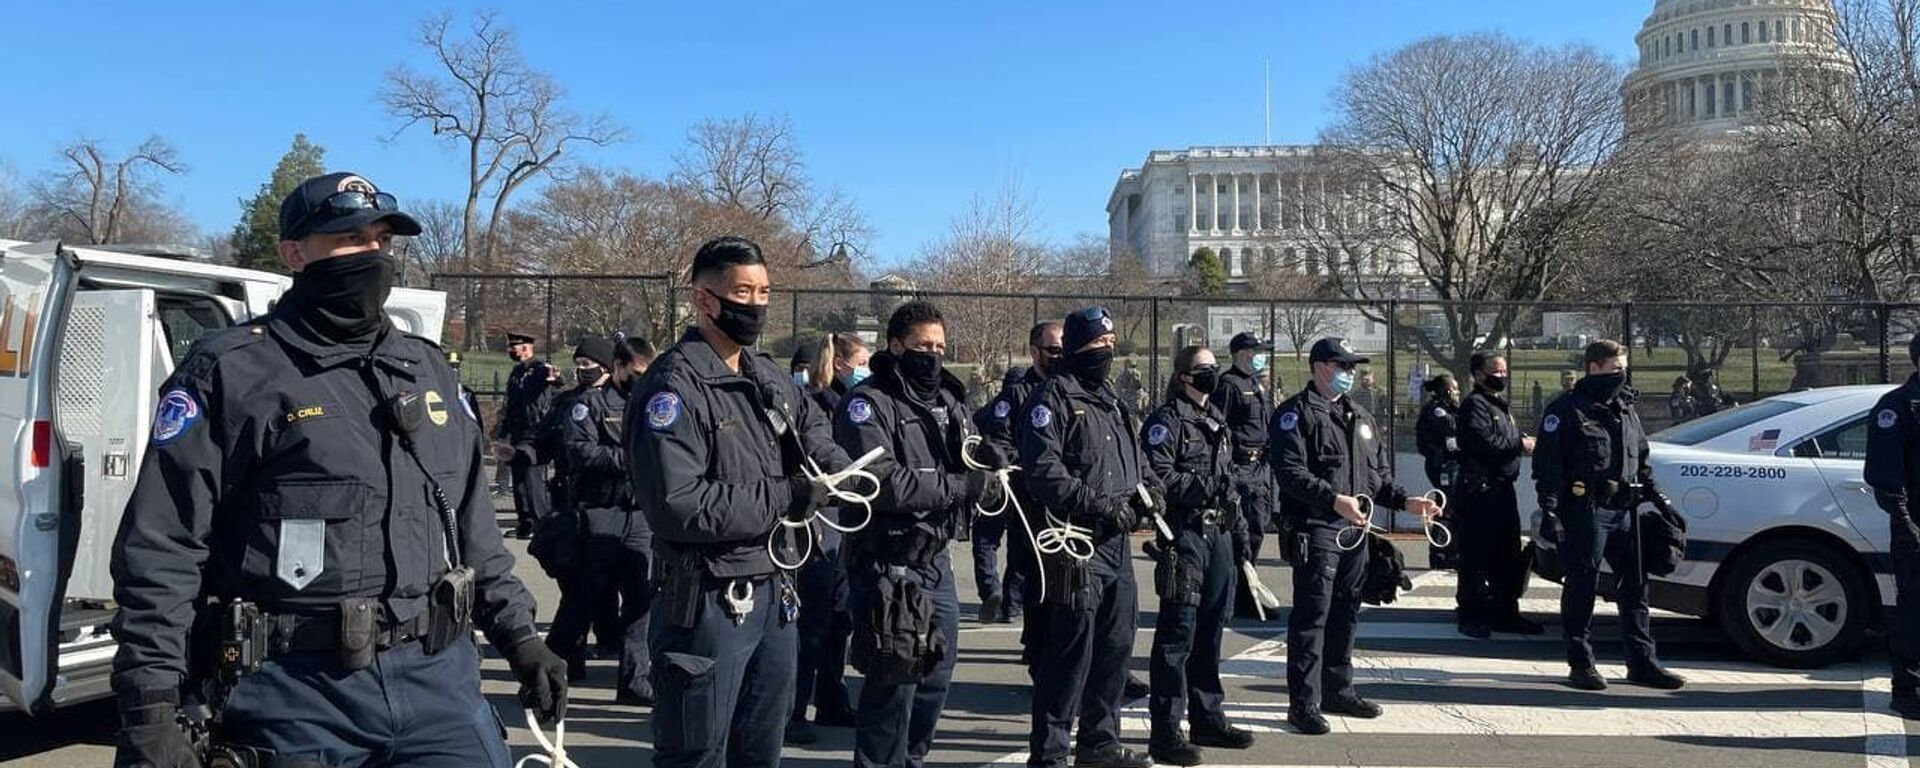 Police officers stand on guard outside US Capitol building as House of Representatives votes to impeach Trump - Sputnik International, 1920, 18.09.2021